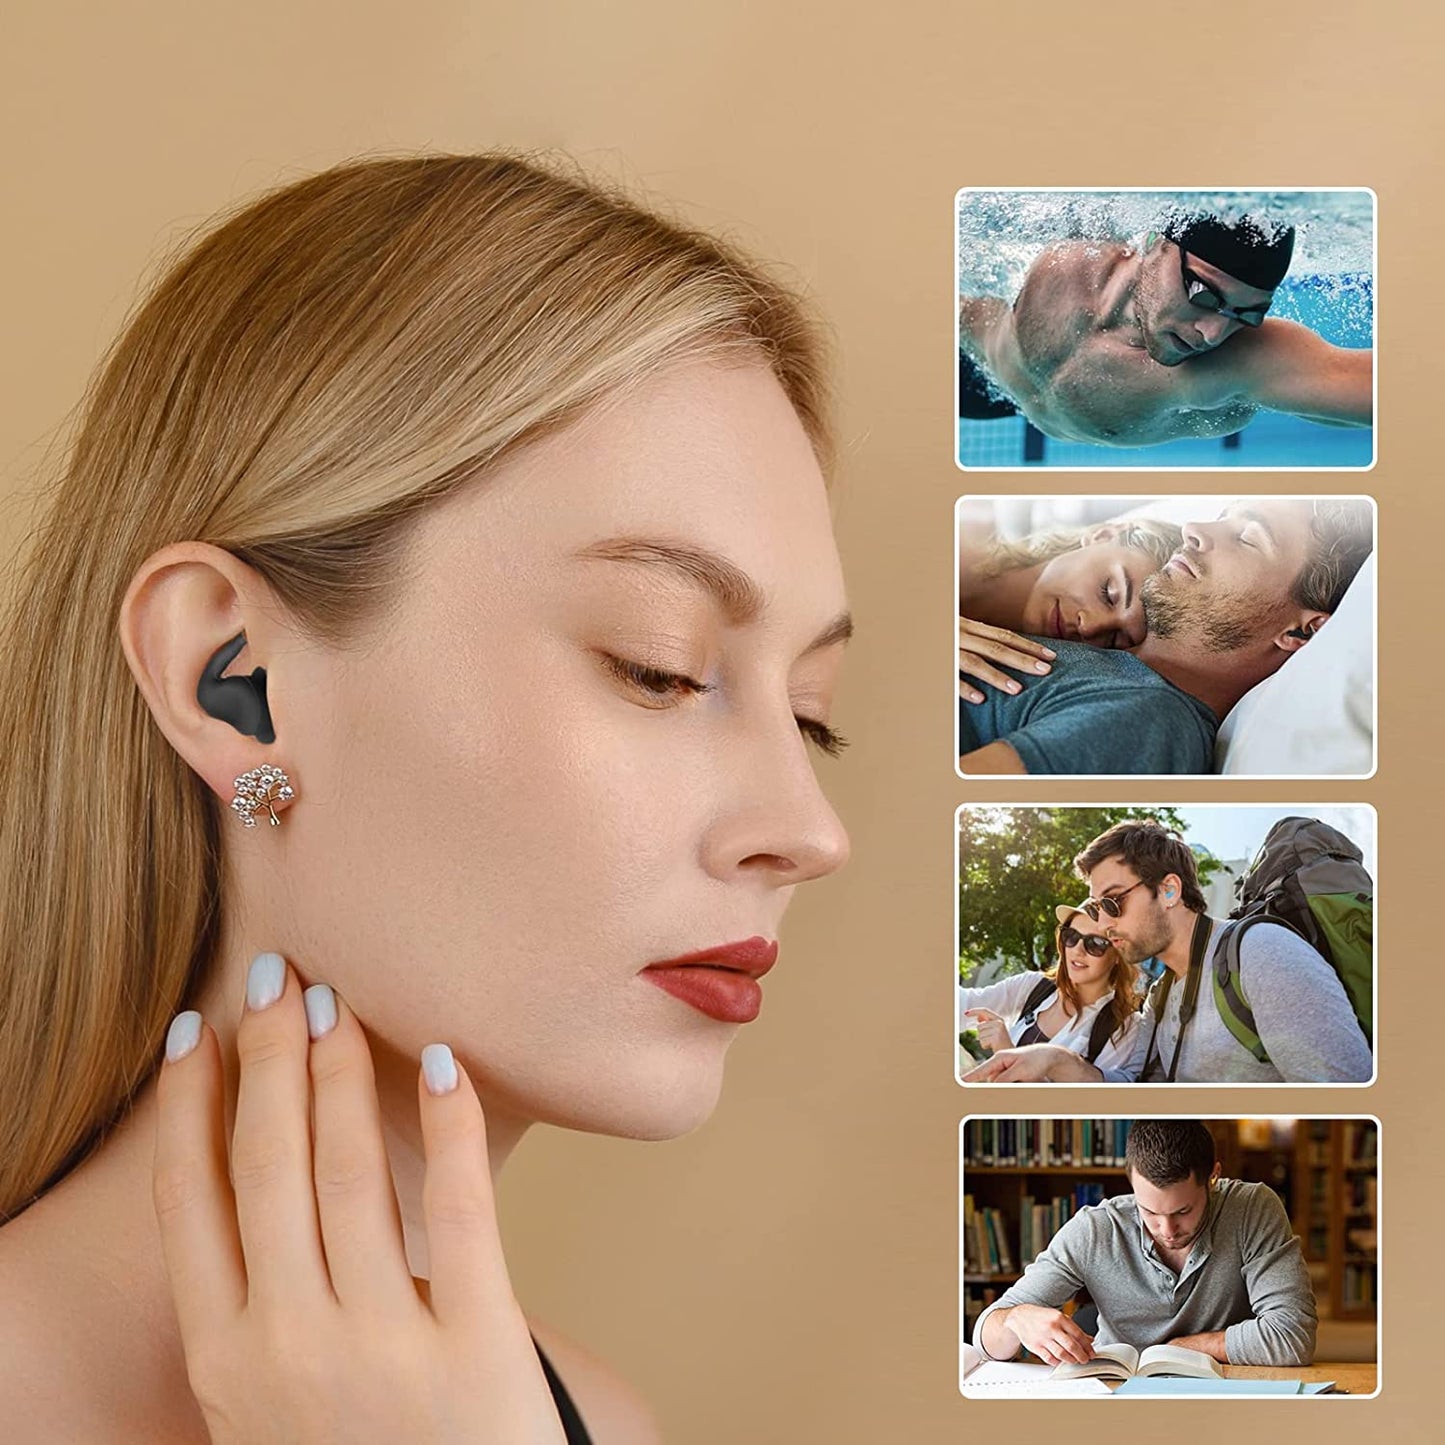 EarPlugs for Sleeping Noise Cancelling 2 PCS Reusable Silicone Earplugs Waterproof Noise Reduction for Sleeping, Swimming